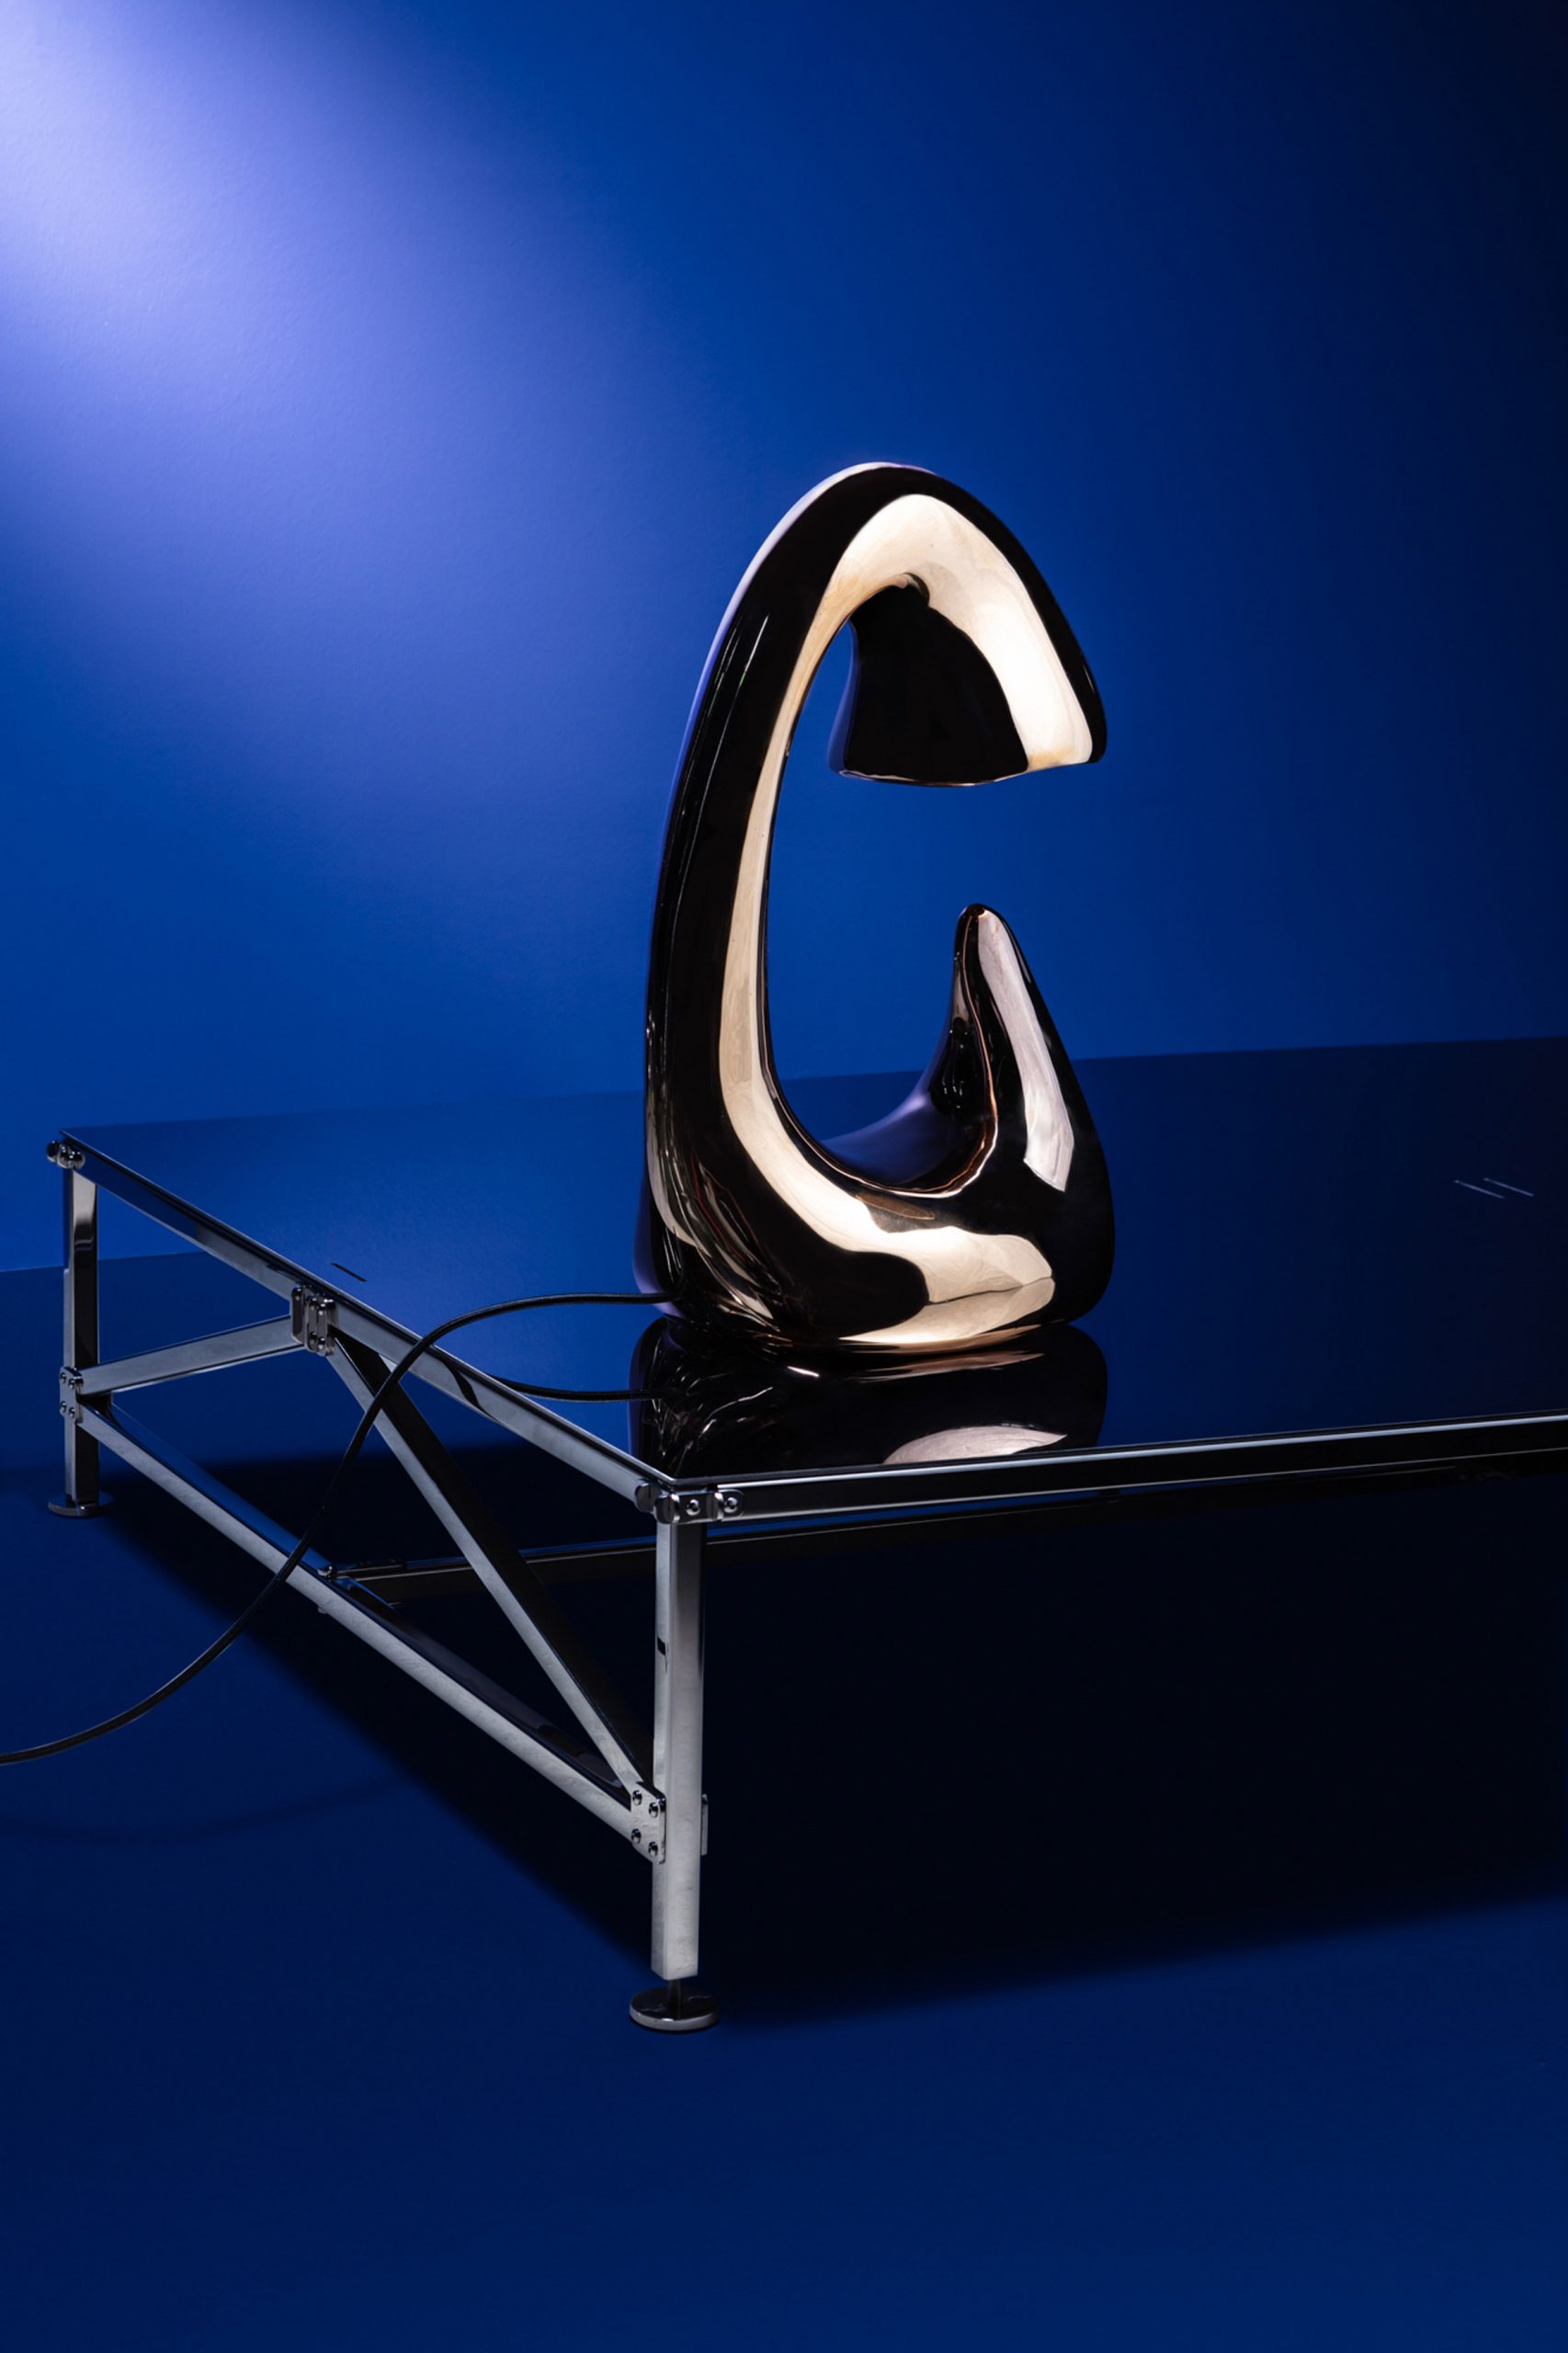 Lamp by Carlo Lorenzetti for Brassless exhibition